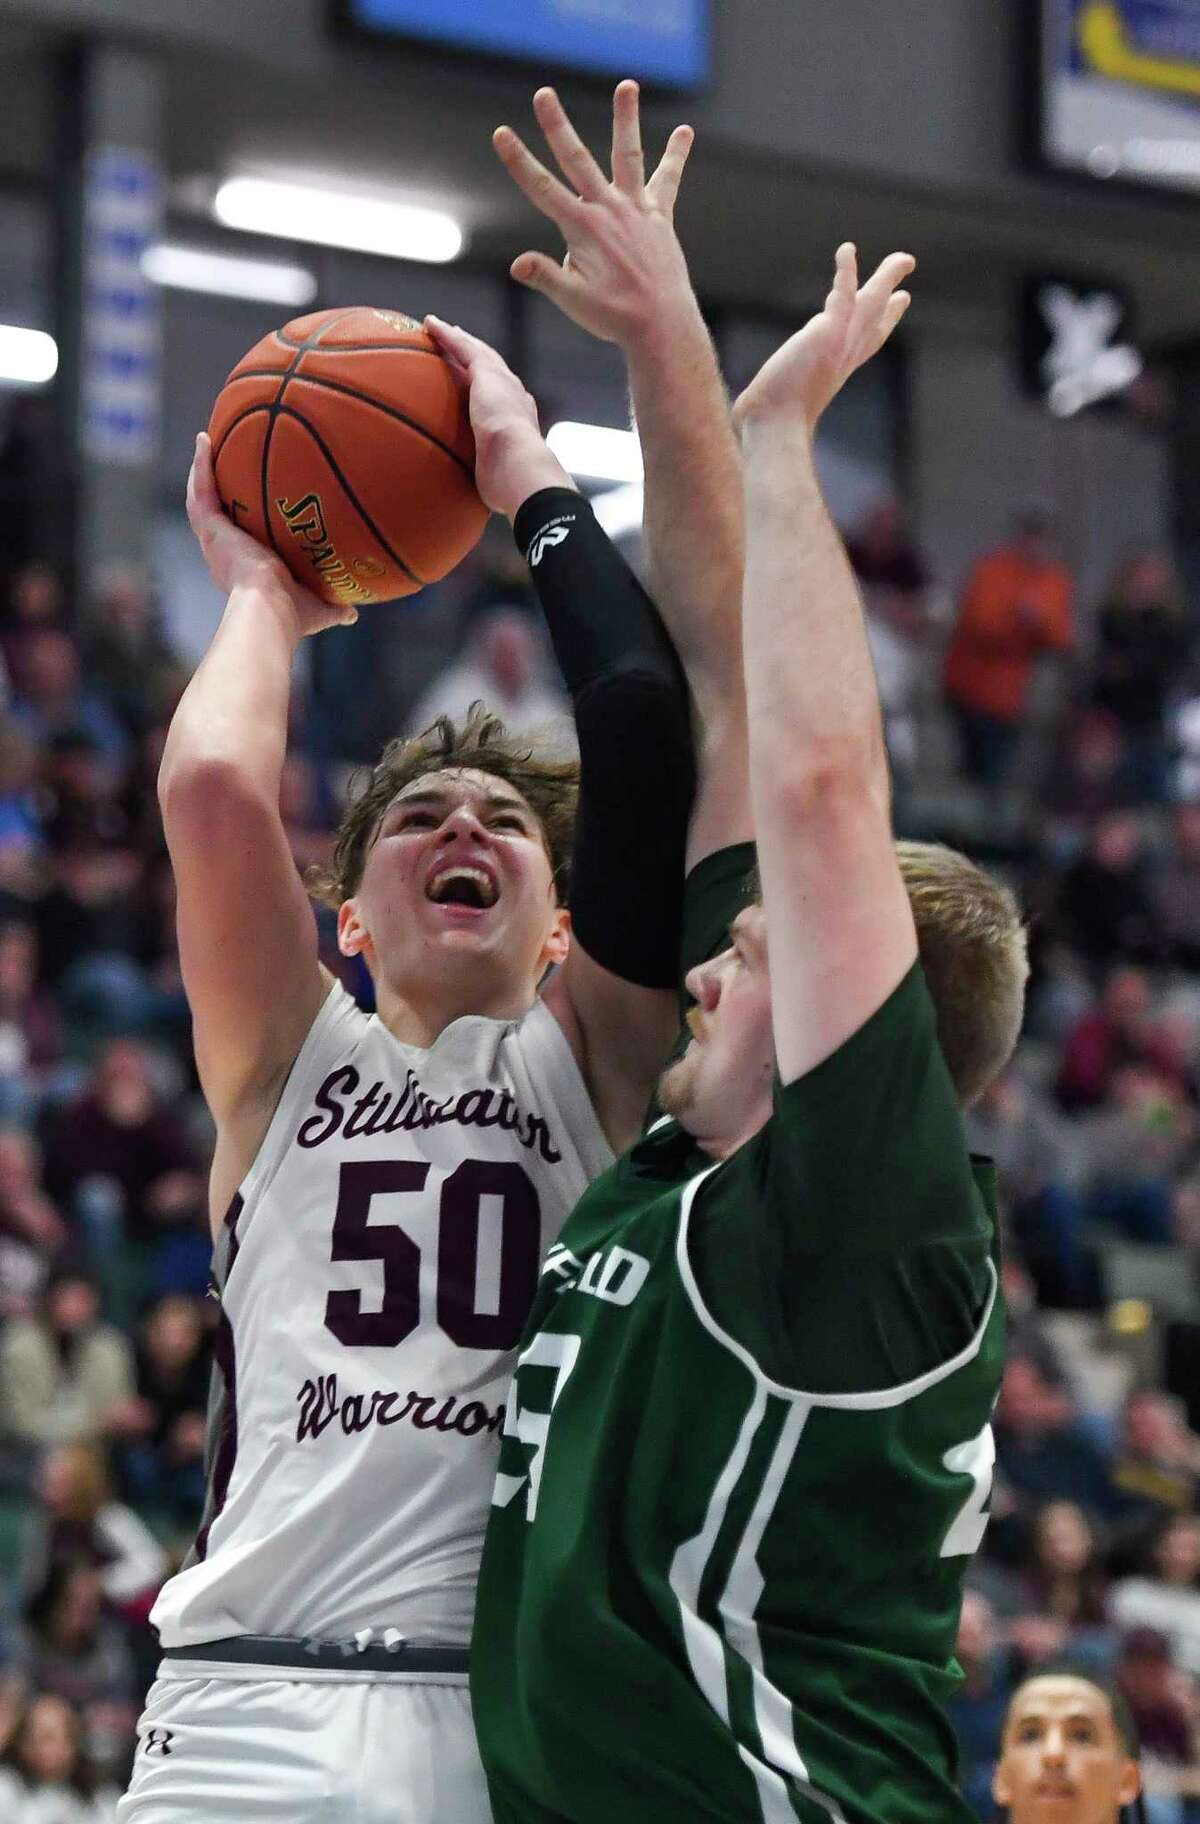 Stillwater's Jaxon Mueller (50) takes a shot over Newfield's Garrett Porter during the Class C final at the NYSPHSAA Boys Basketball Championships in Glens Falls, N.Y., Saturday, March 19, 2022. (Adrian Kraus / Special to the Times Union)